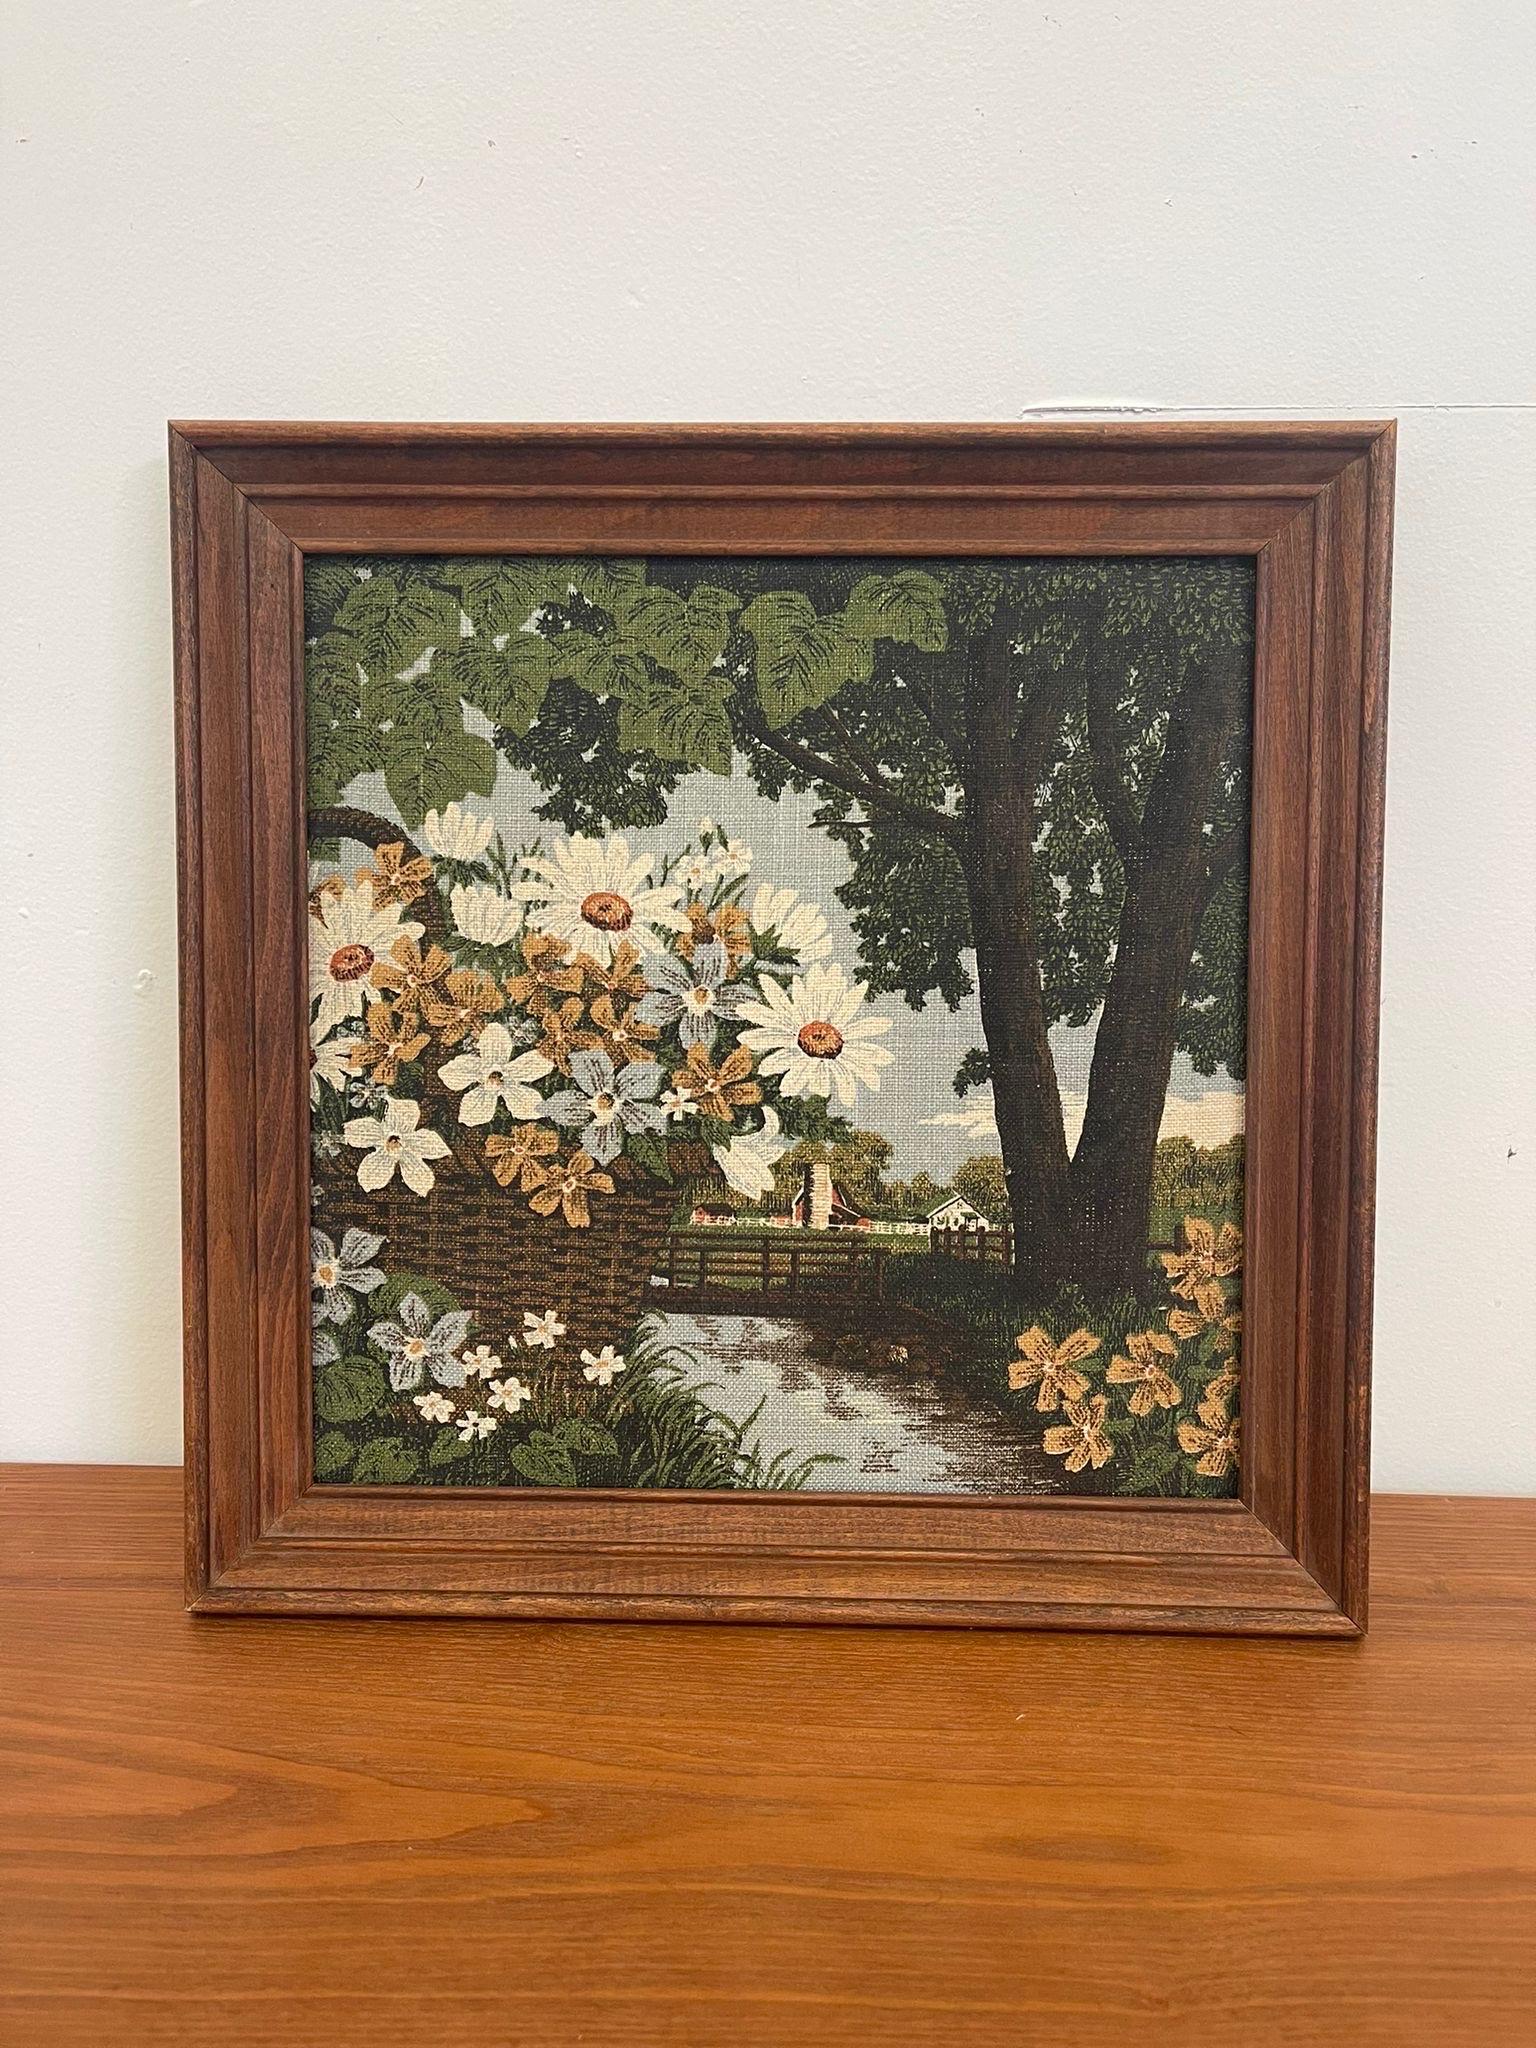 Vintage Linen Artwork of a Country Landscape. Frame Has Makers Mark on the Back. Vintage Condition Consistent with Age as Pictured.

Dimensions. 16 W ; 3/4 D ; 16 H